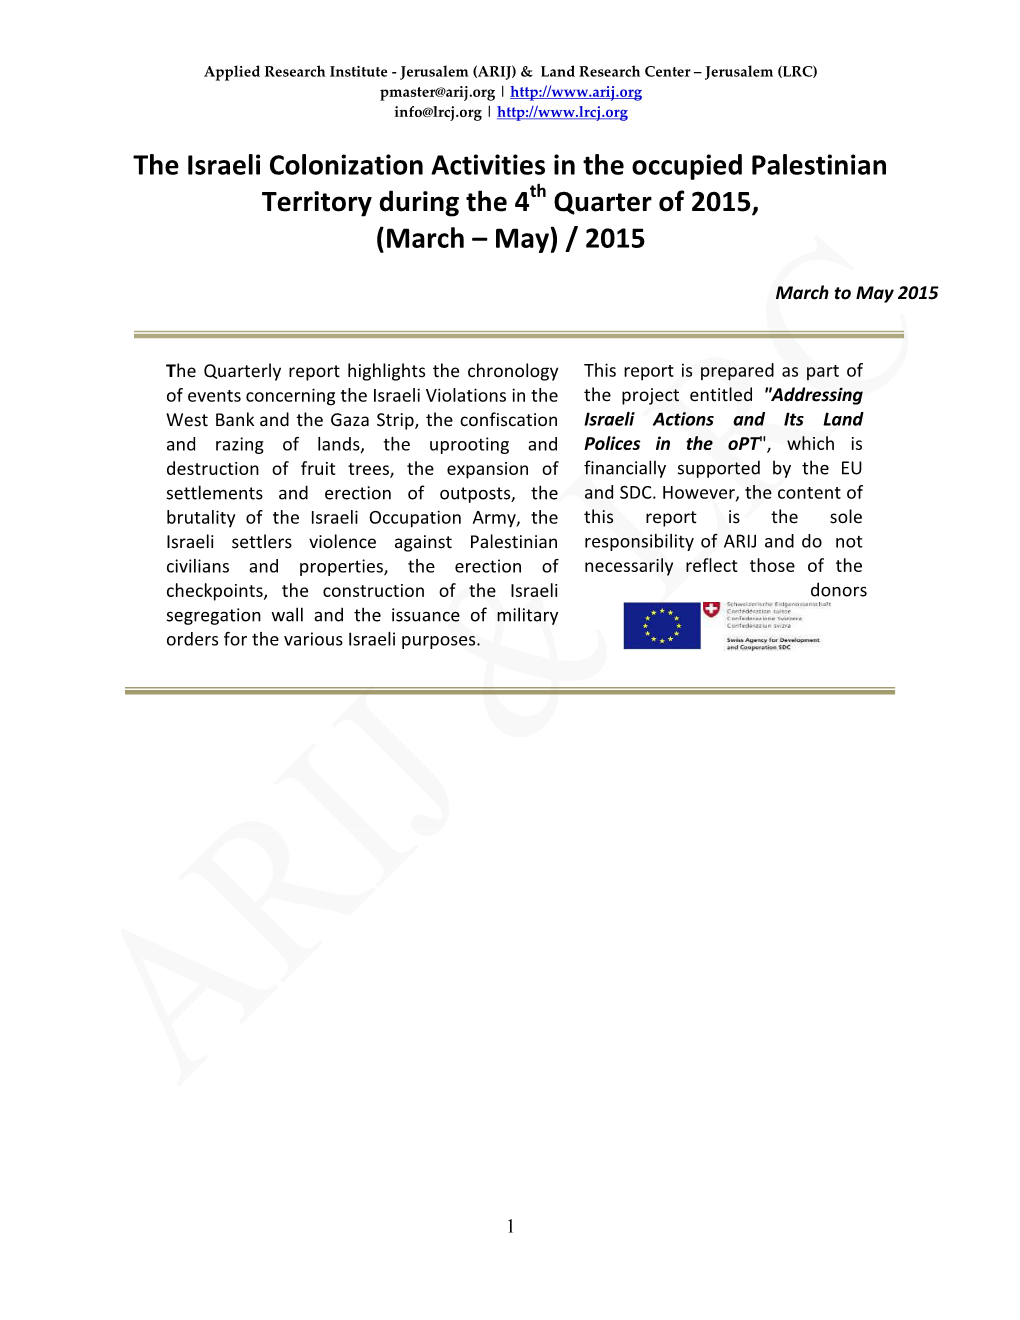 The Israeli Colonization Activities in the Occupied Palestinian Territory During the 4Th Quarter of 2015, (March – May) / 2015